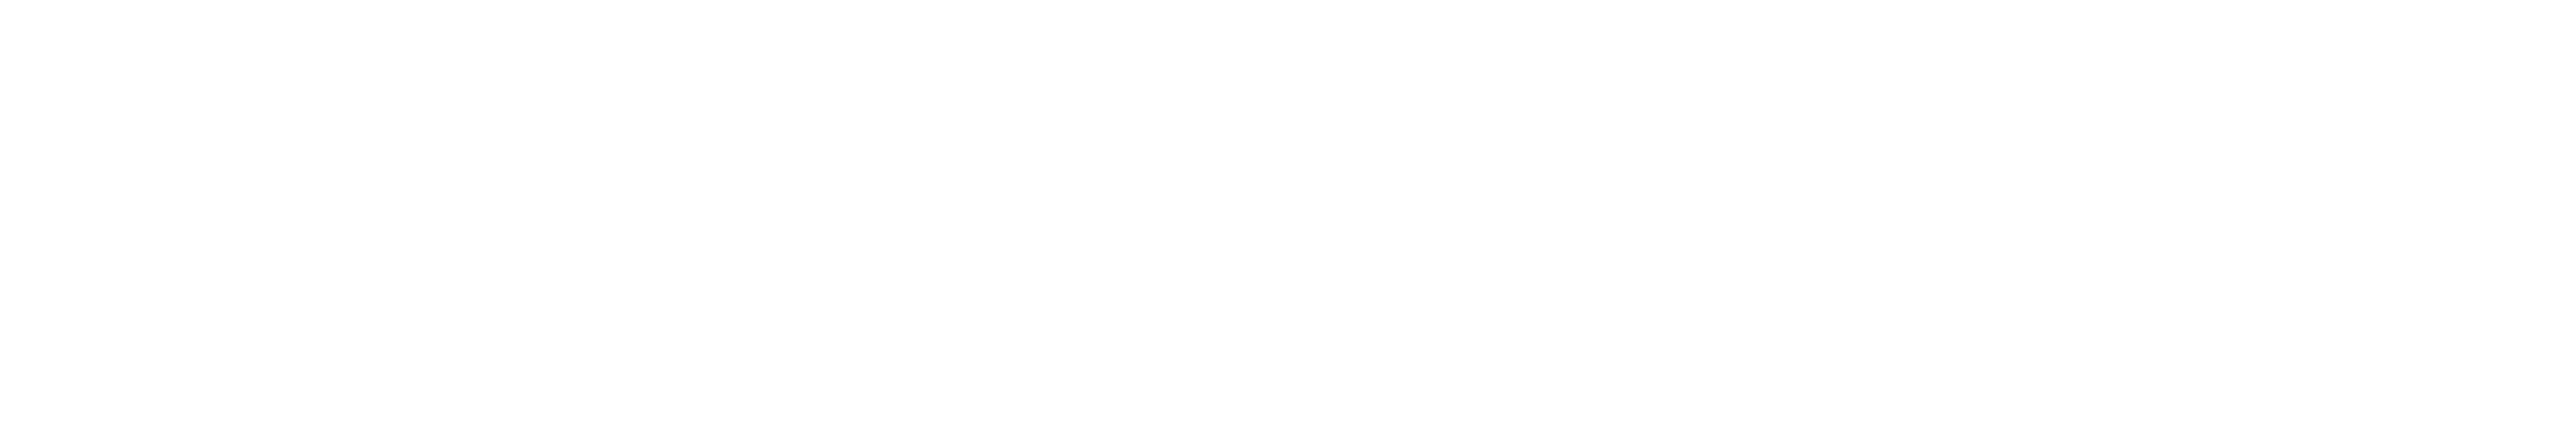 Reindeers section image